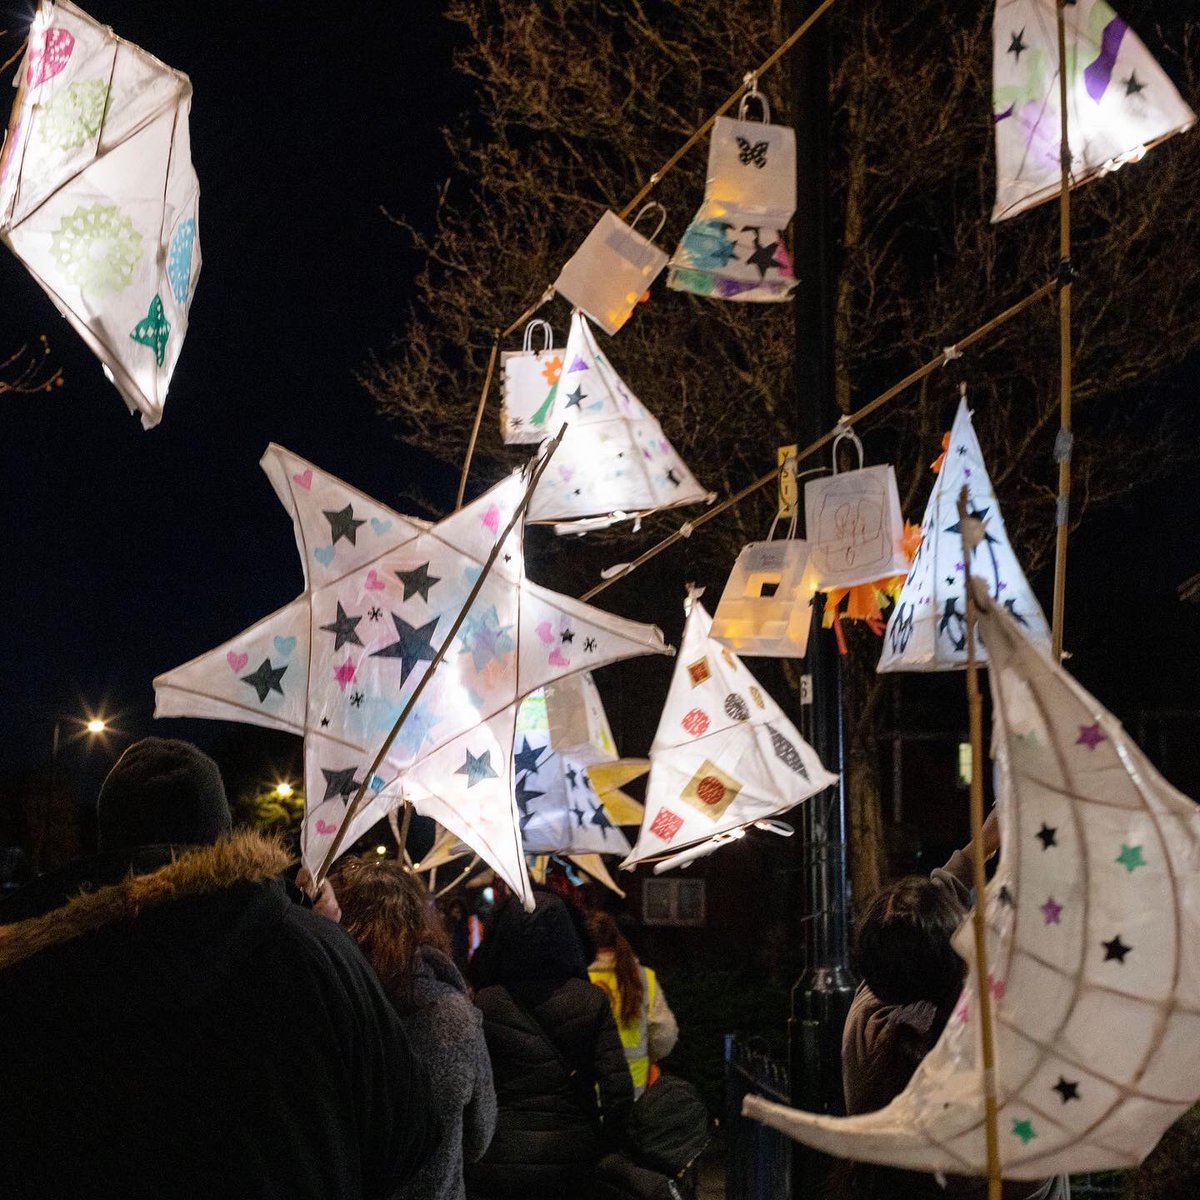 Happy to say, we are working with @artsinramsgate and with support from @TNLComFund Ramsgate Lantern Festival is back. 22 Dec, more info soon